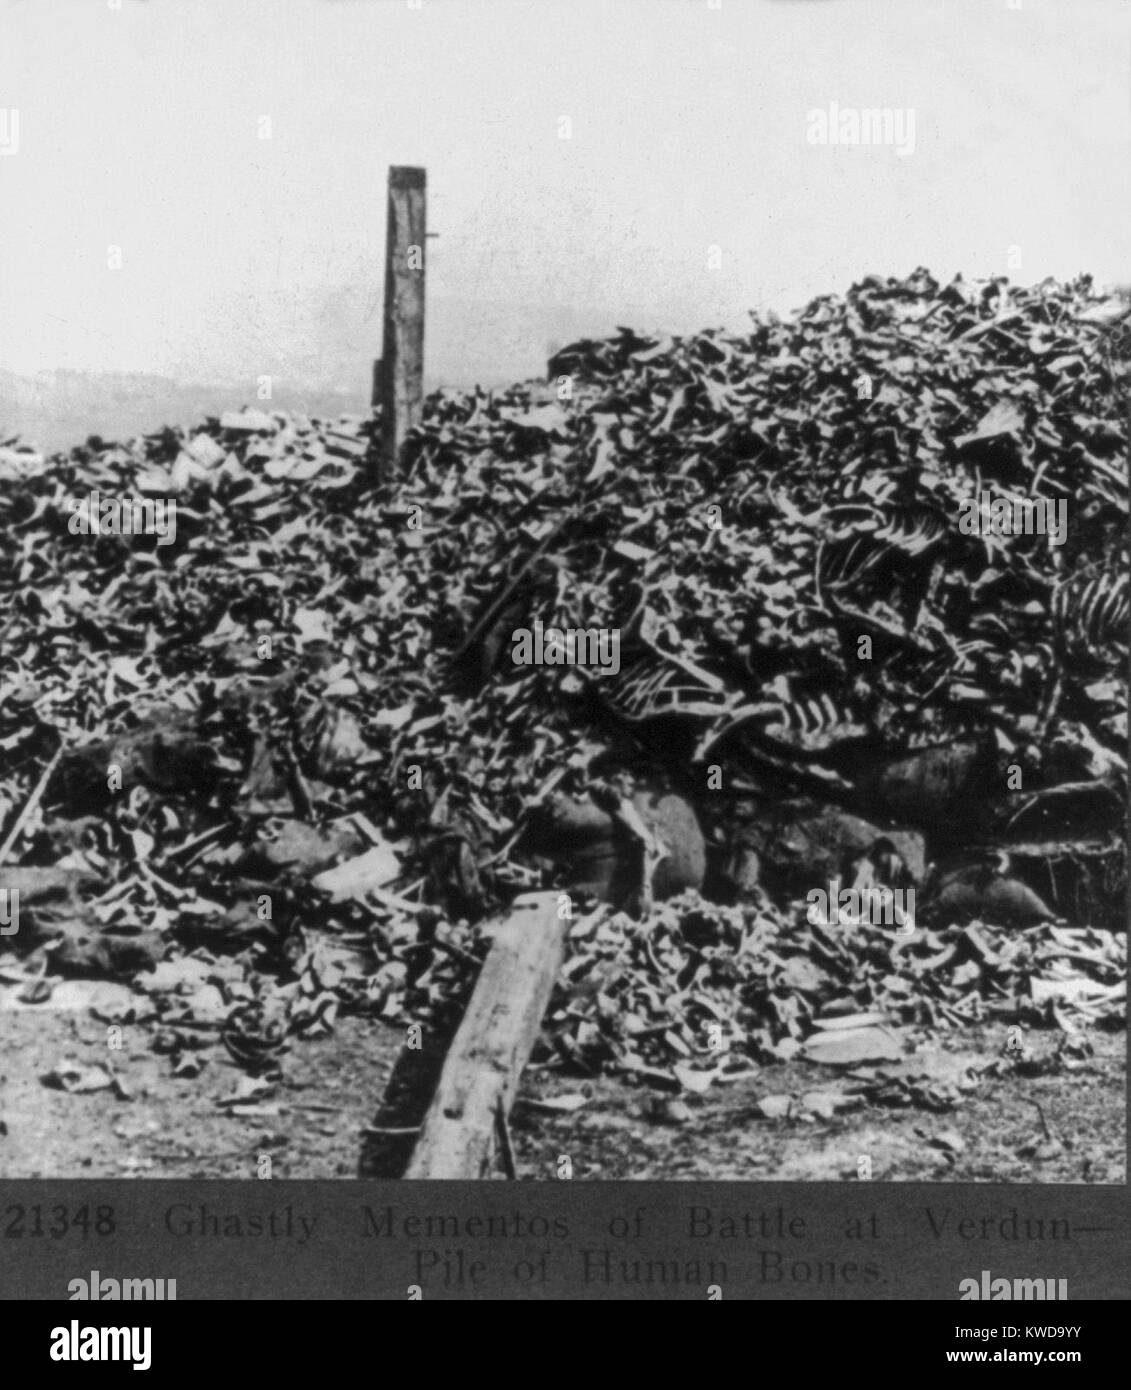 World War 1: Battle of Verdun. Human bones were the ghastly mementos of battle at Verdun. After the war, the Douaumont Ossuary was built to memorialize and contain the bones of 130,000 French and German unknown dead from the Verdun battlefield. Ca. 1919. (BSLOC 2013 1 108) Stock Photo